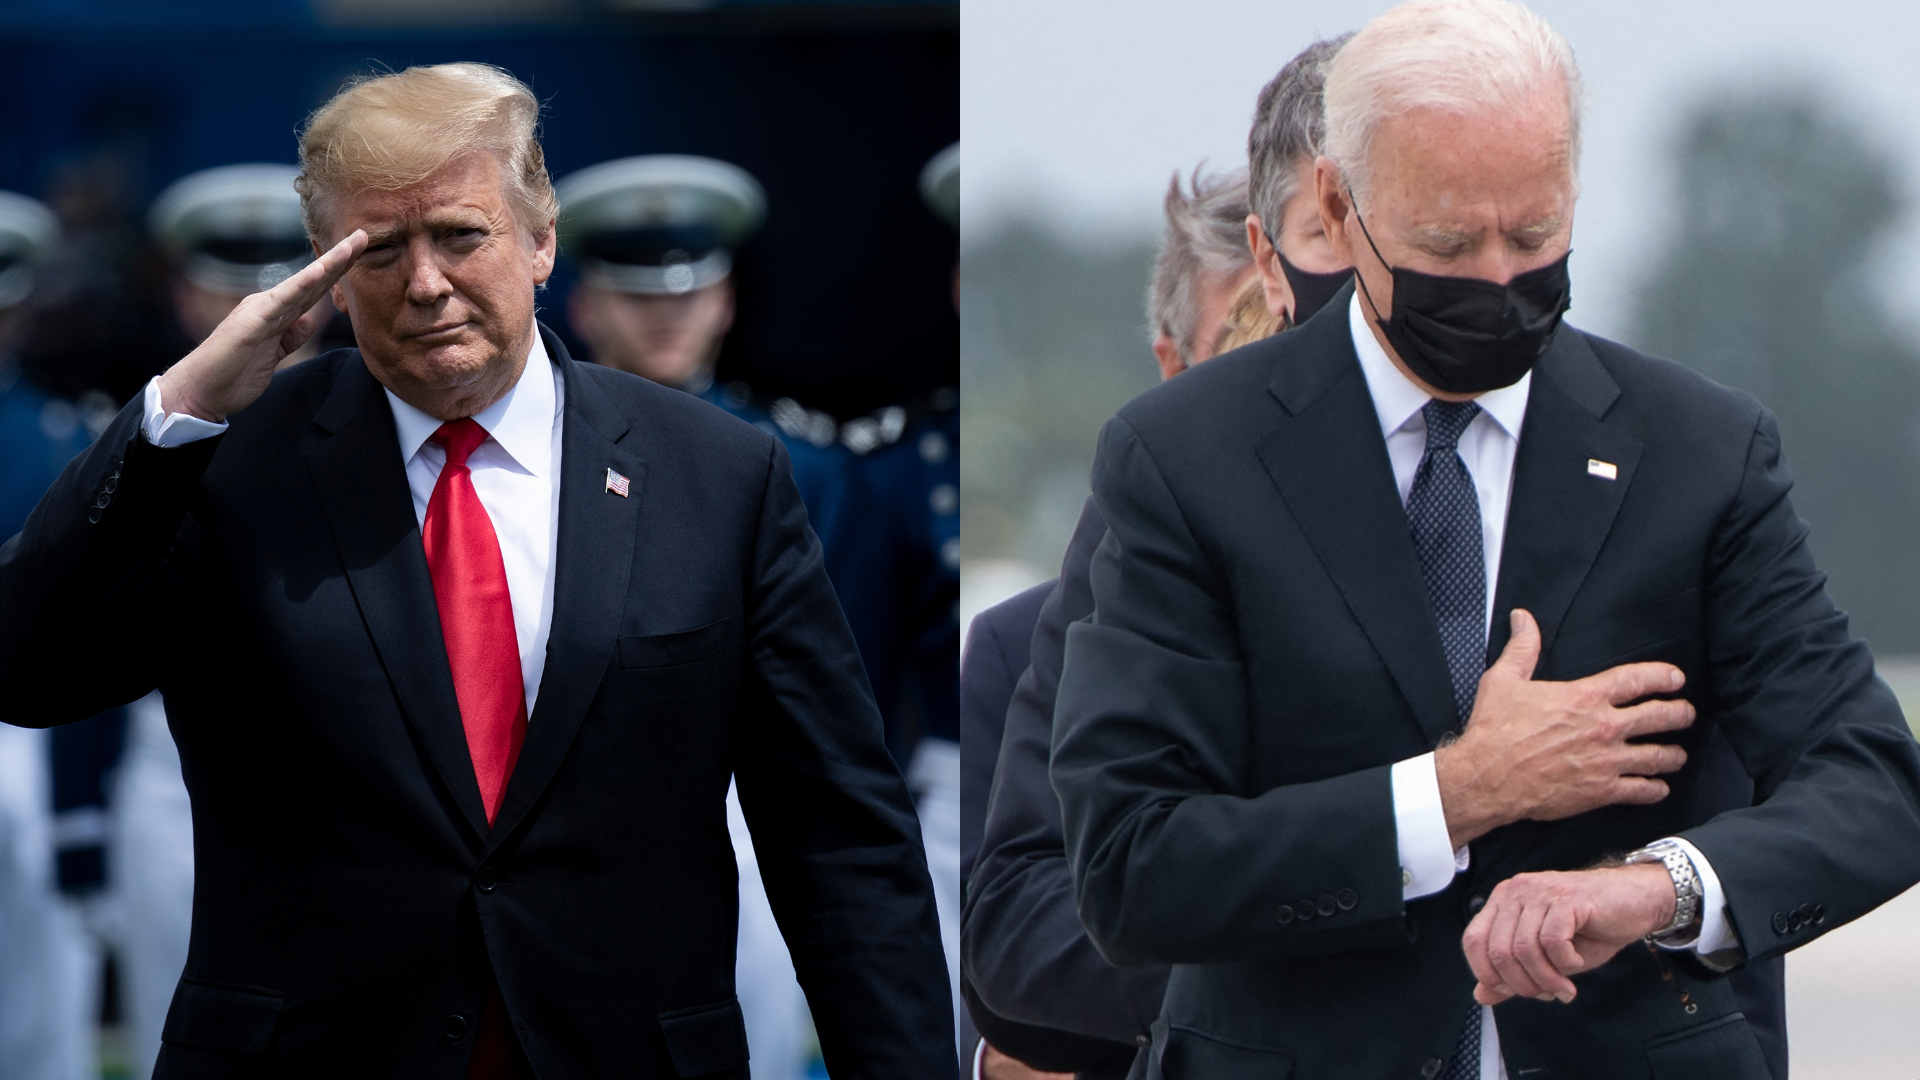 Trump pays tribute to Gold Star families, highlighting the stark difference in treatment compared to Biden’s disrespect.